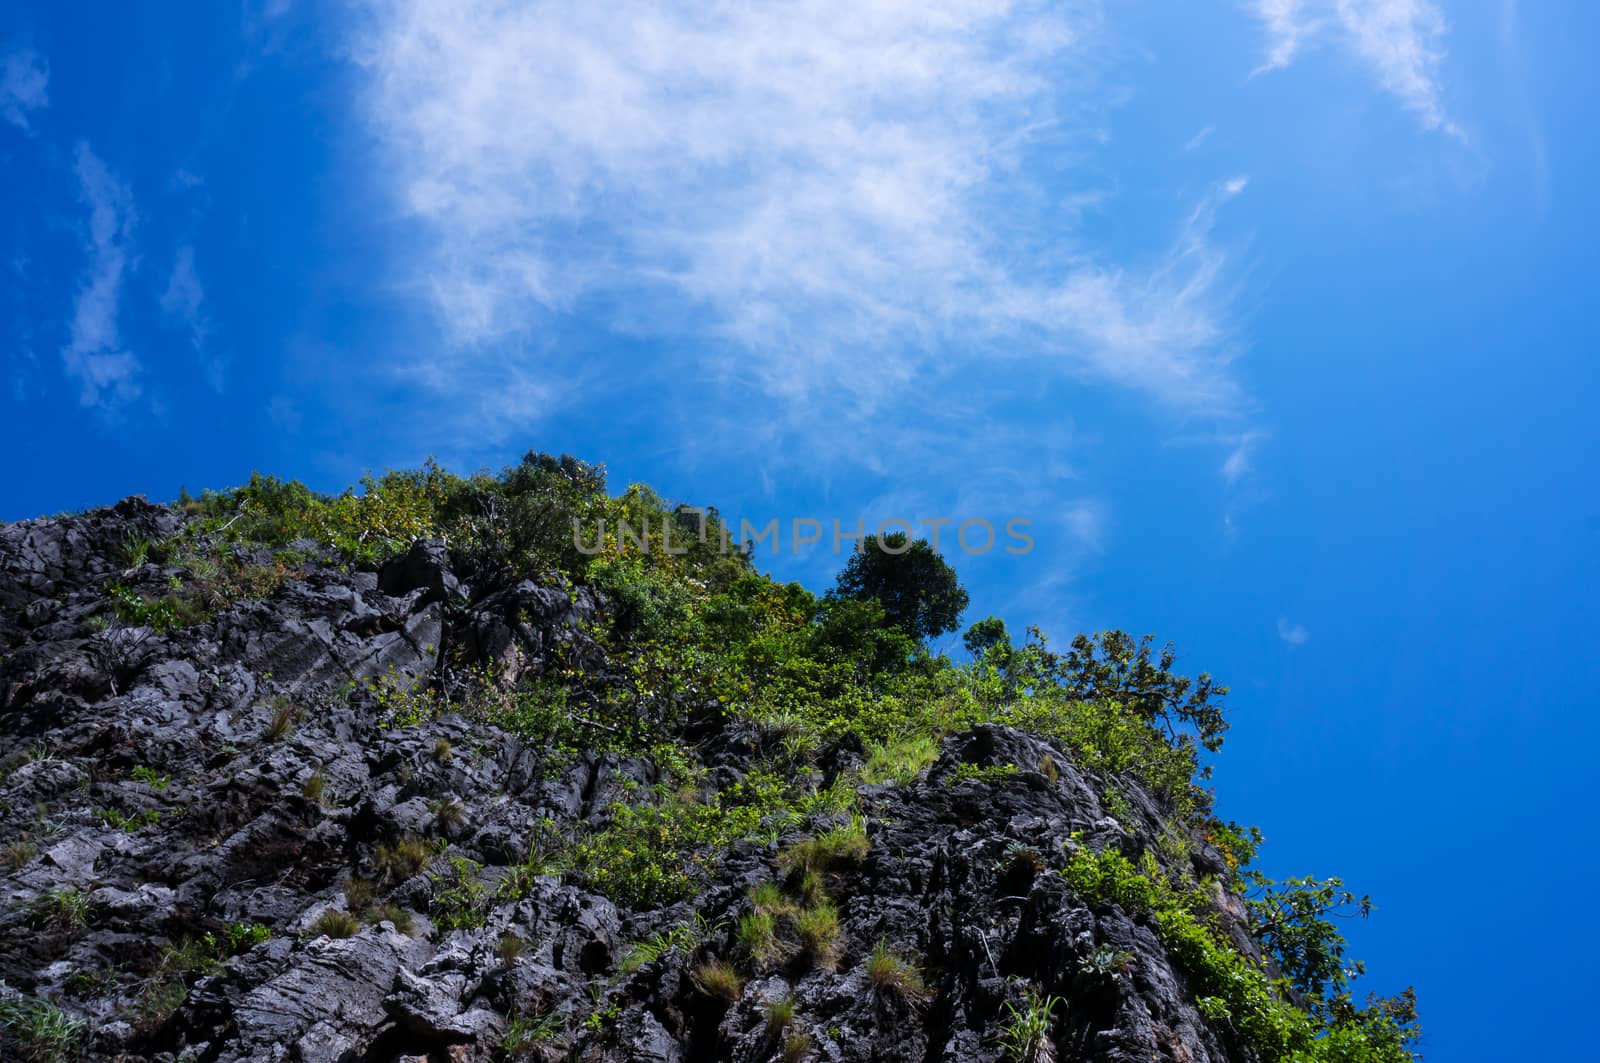 Rock Mountain with clear blue sky, take it at Phi Phi Island with my one day trip. Phi Phi Island was the most famous Island in the Phuket, over 10 million tourist visit here every year. It have big and small Phi Phi Island, and the most beautiful beach was locate in small Phi Phi Island, Maya bay.
